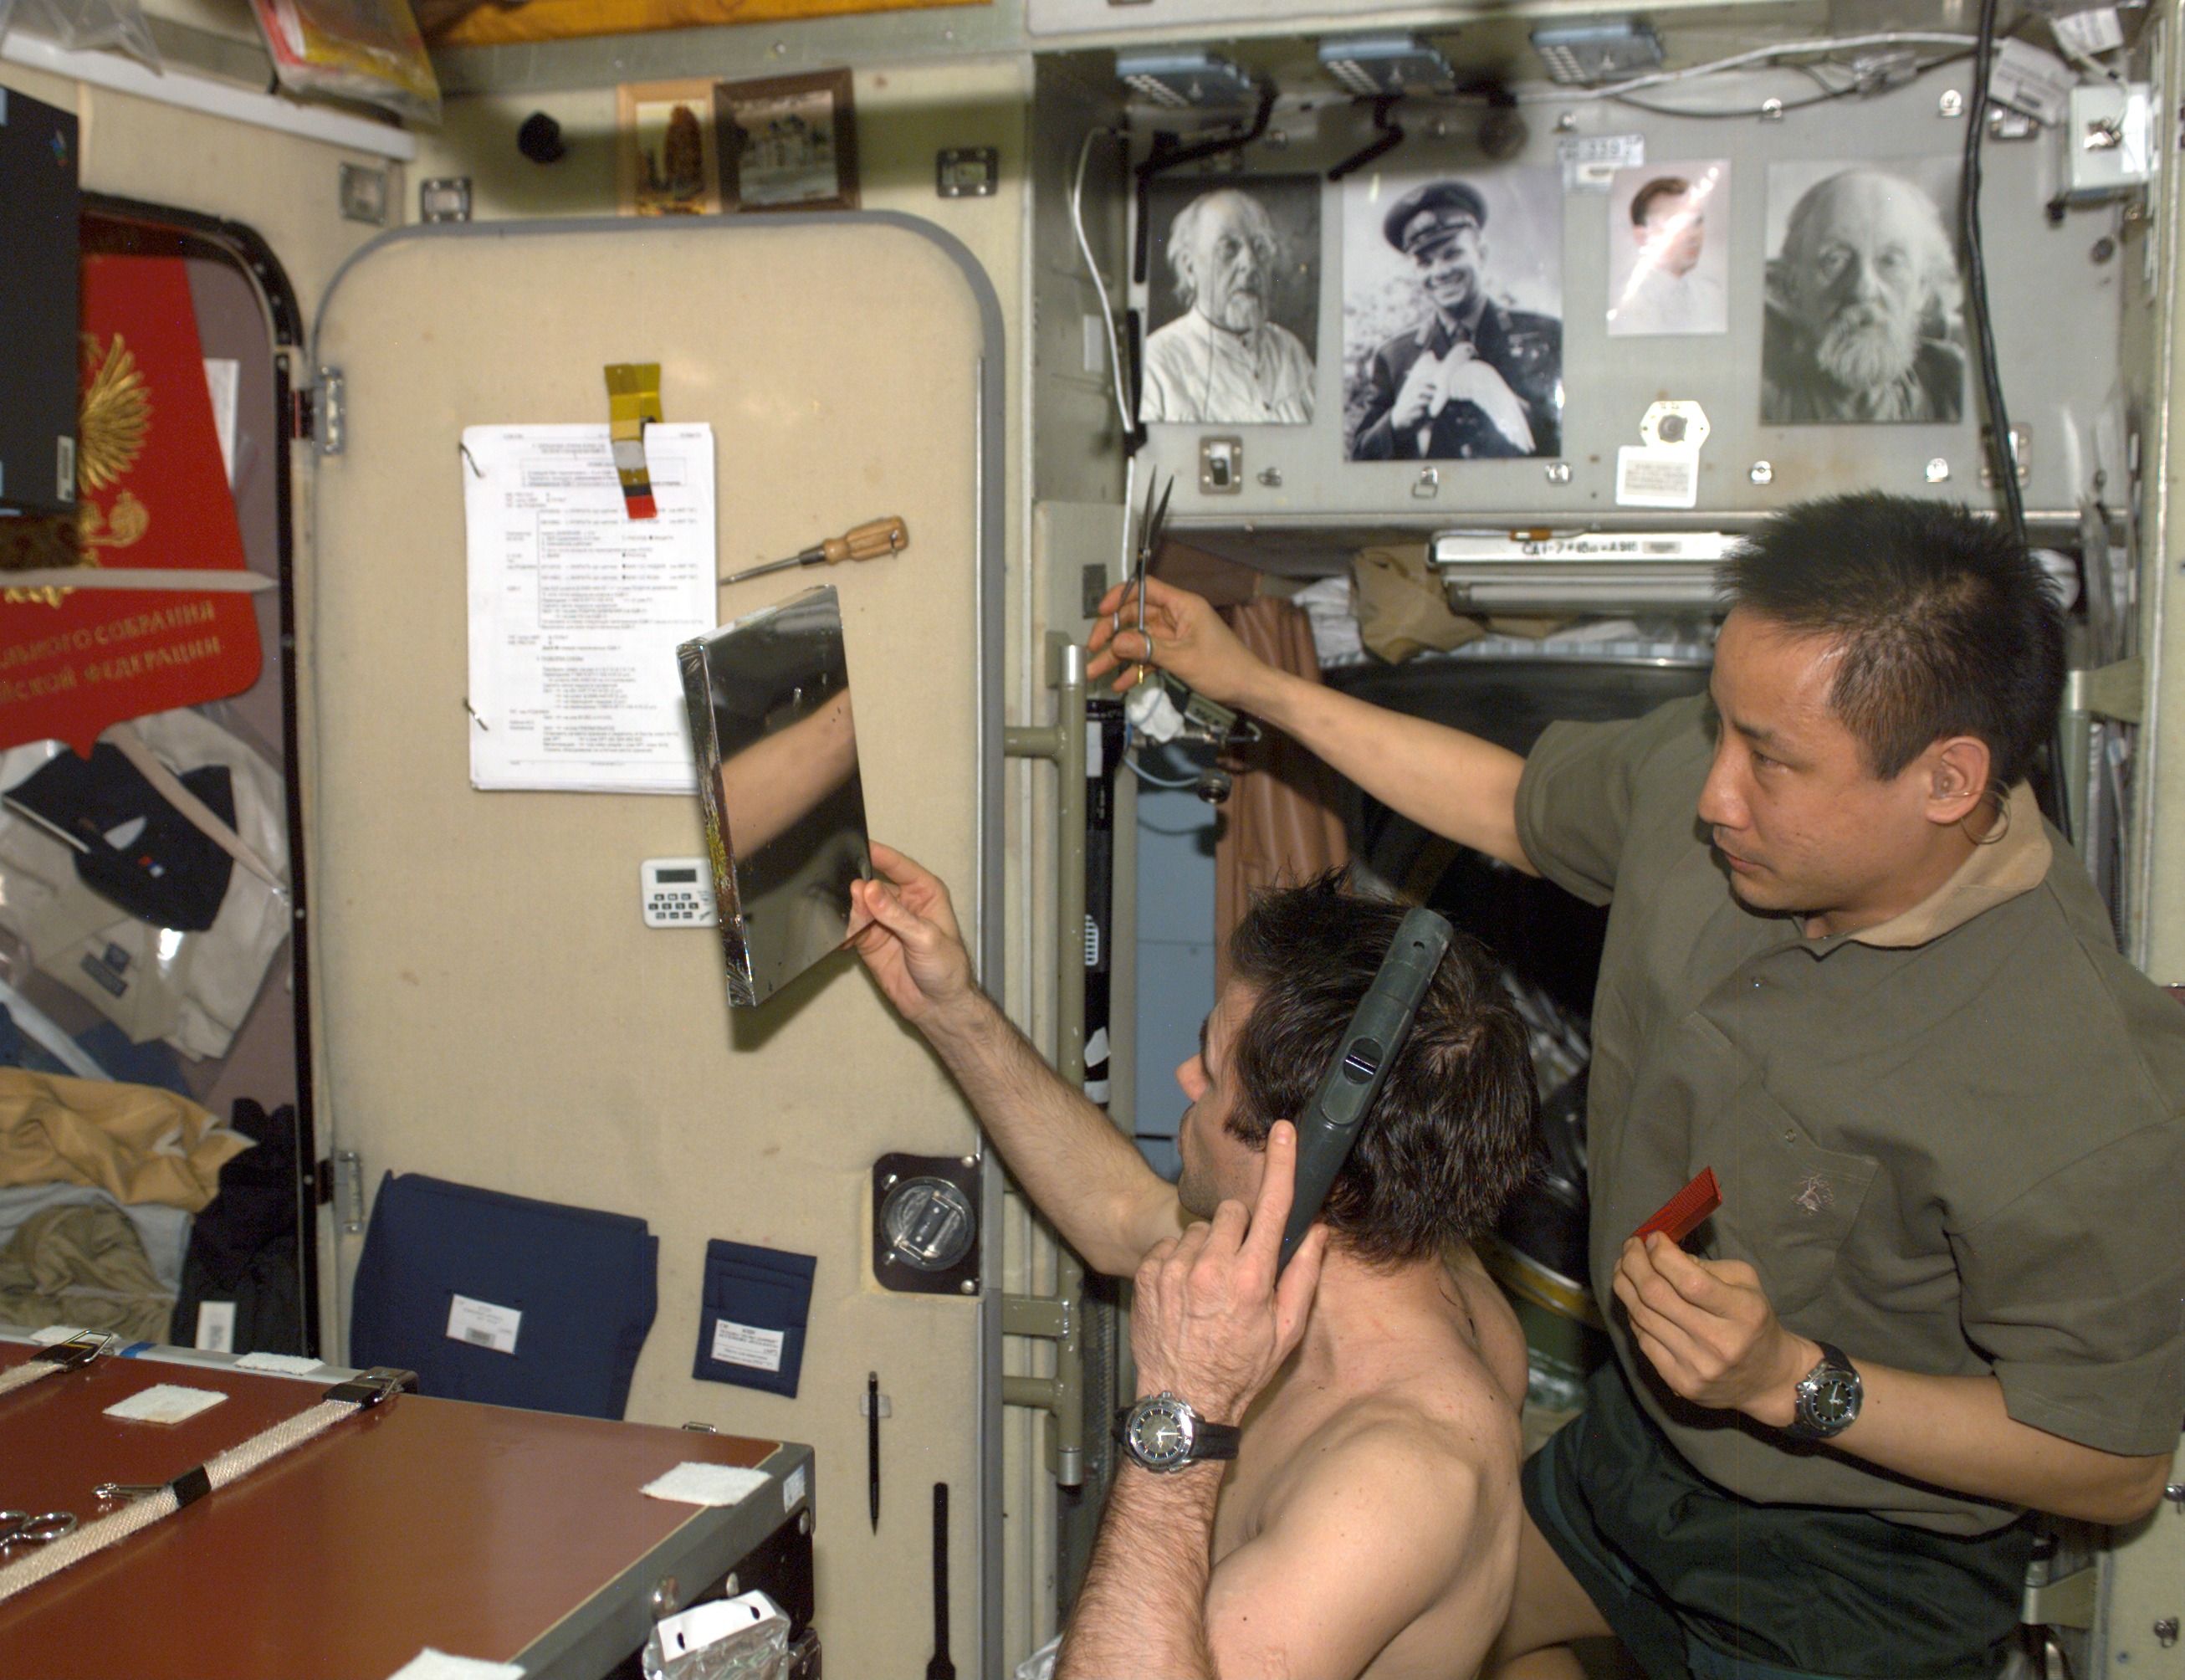 Haircut in space